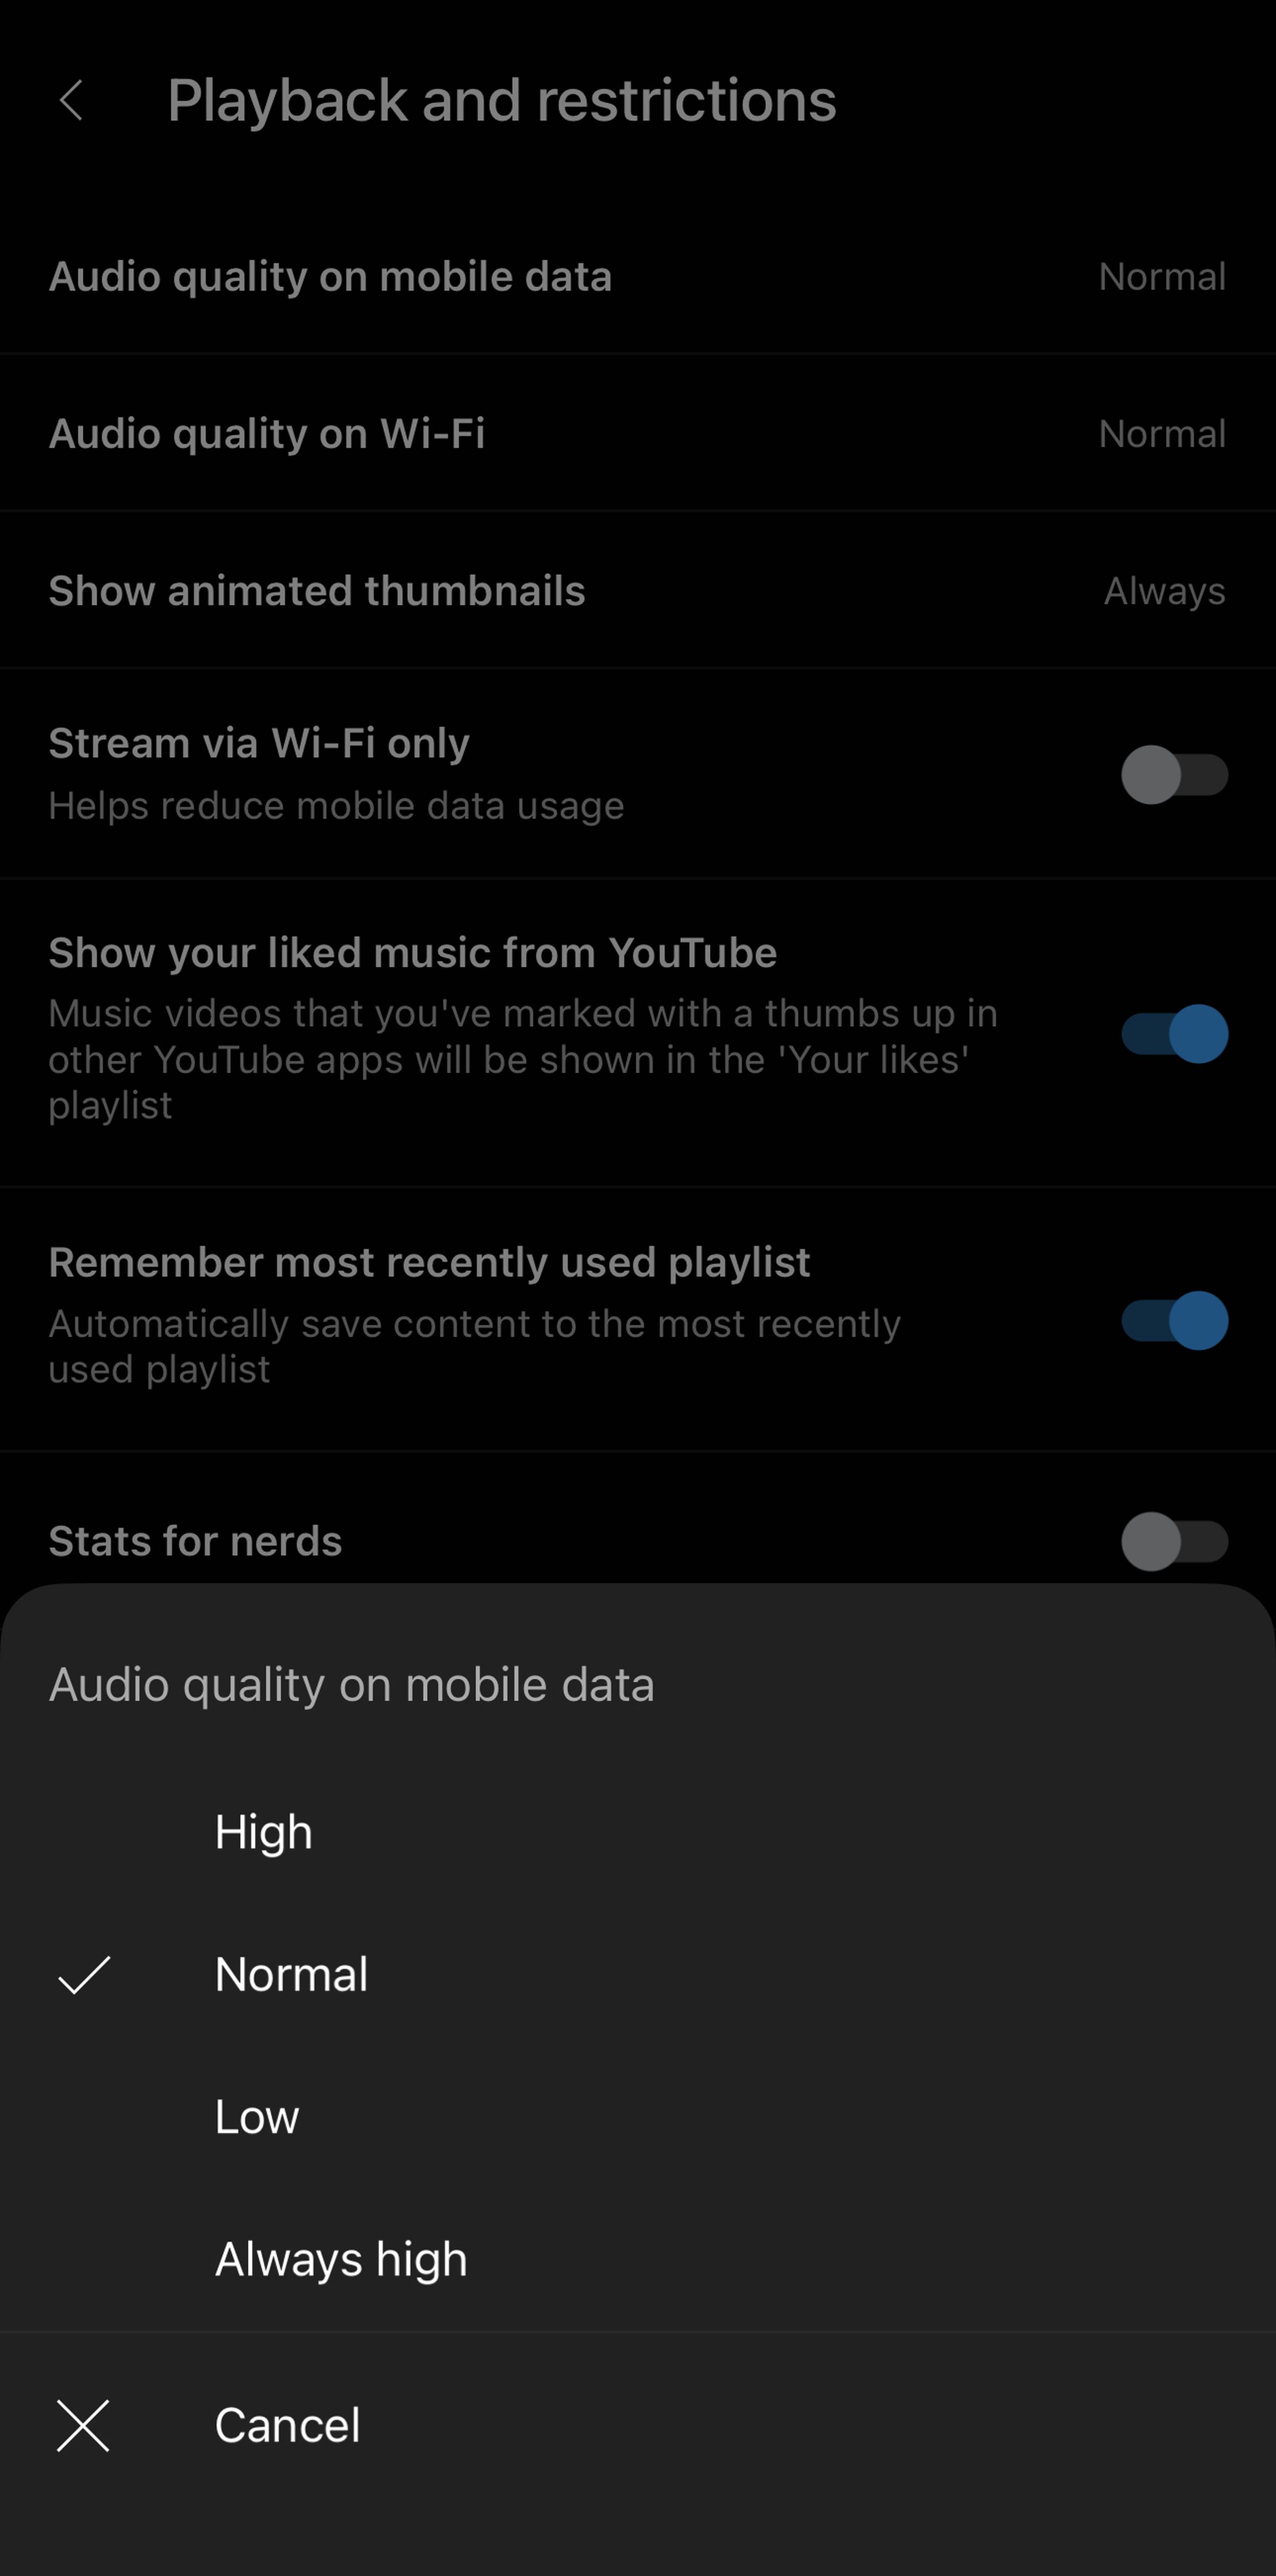 Playback and restrictions page for YouTube Music.